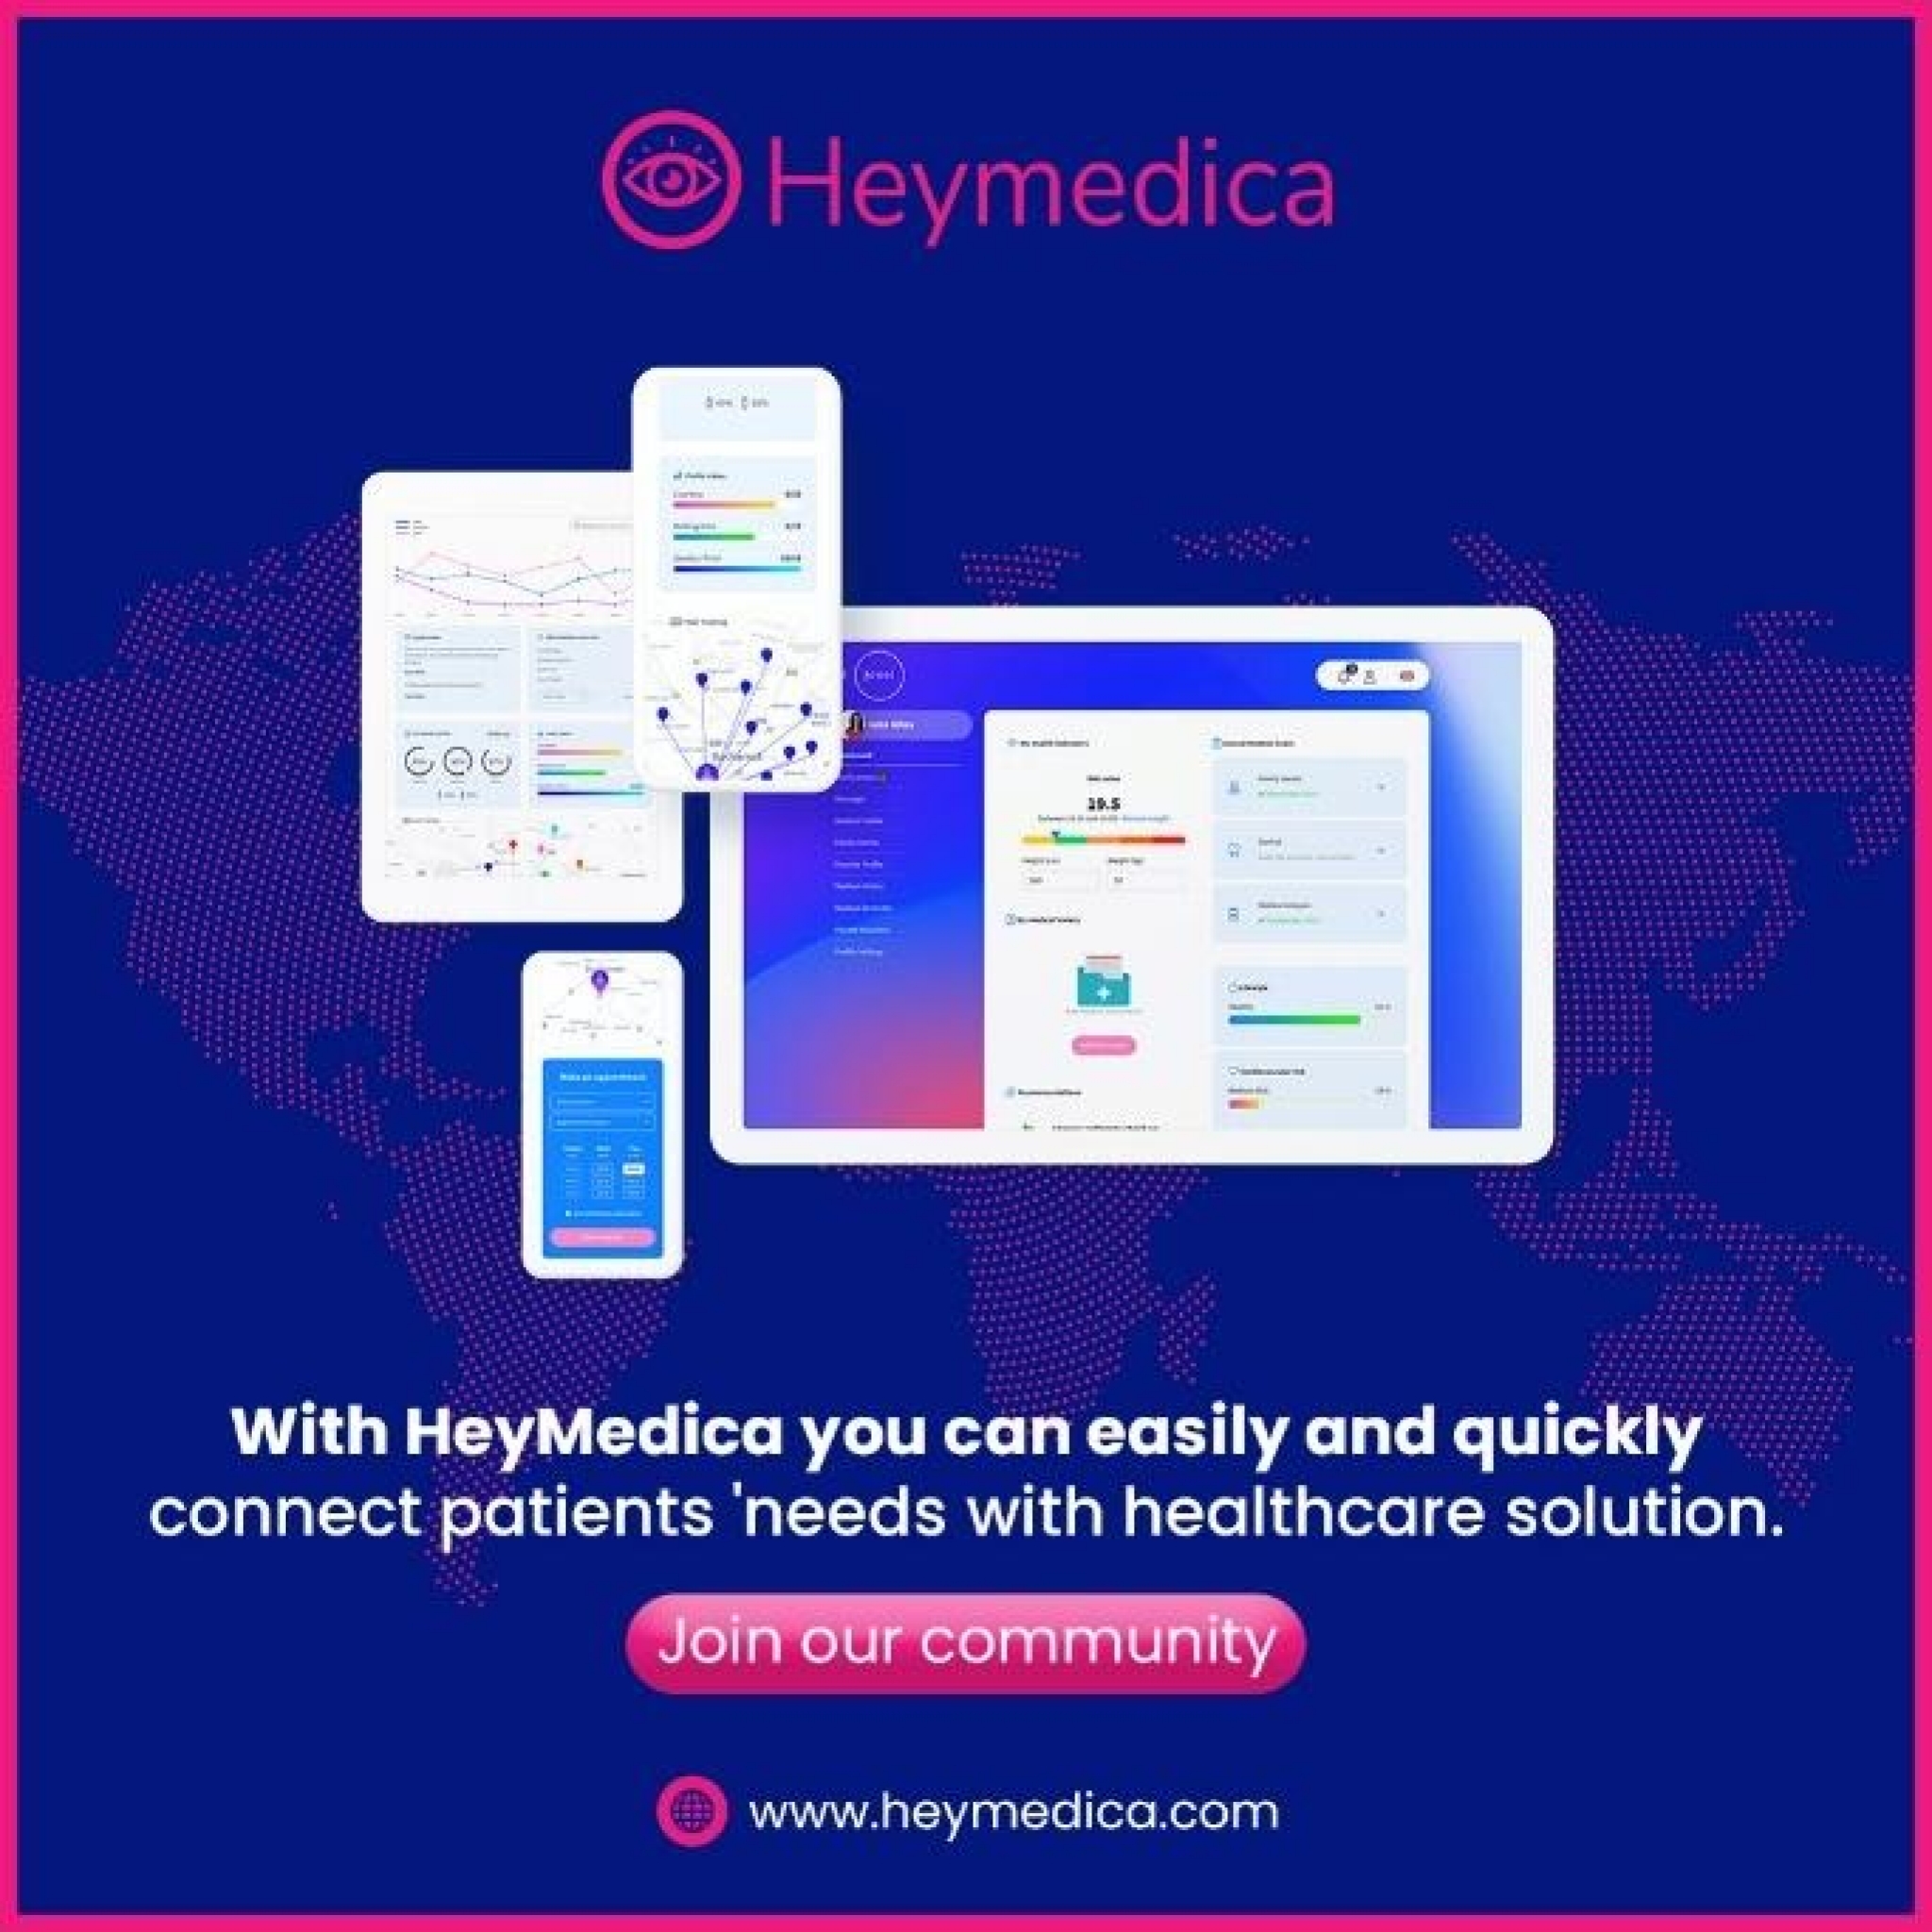 HeyMedica.com: A revolution in the online medical healthcare world is about to happen